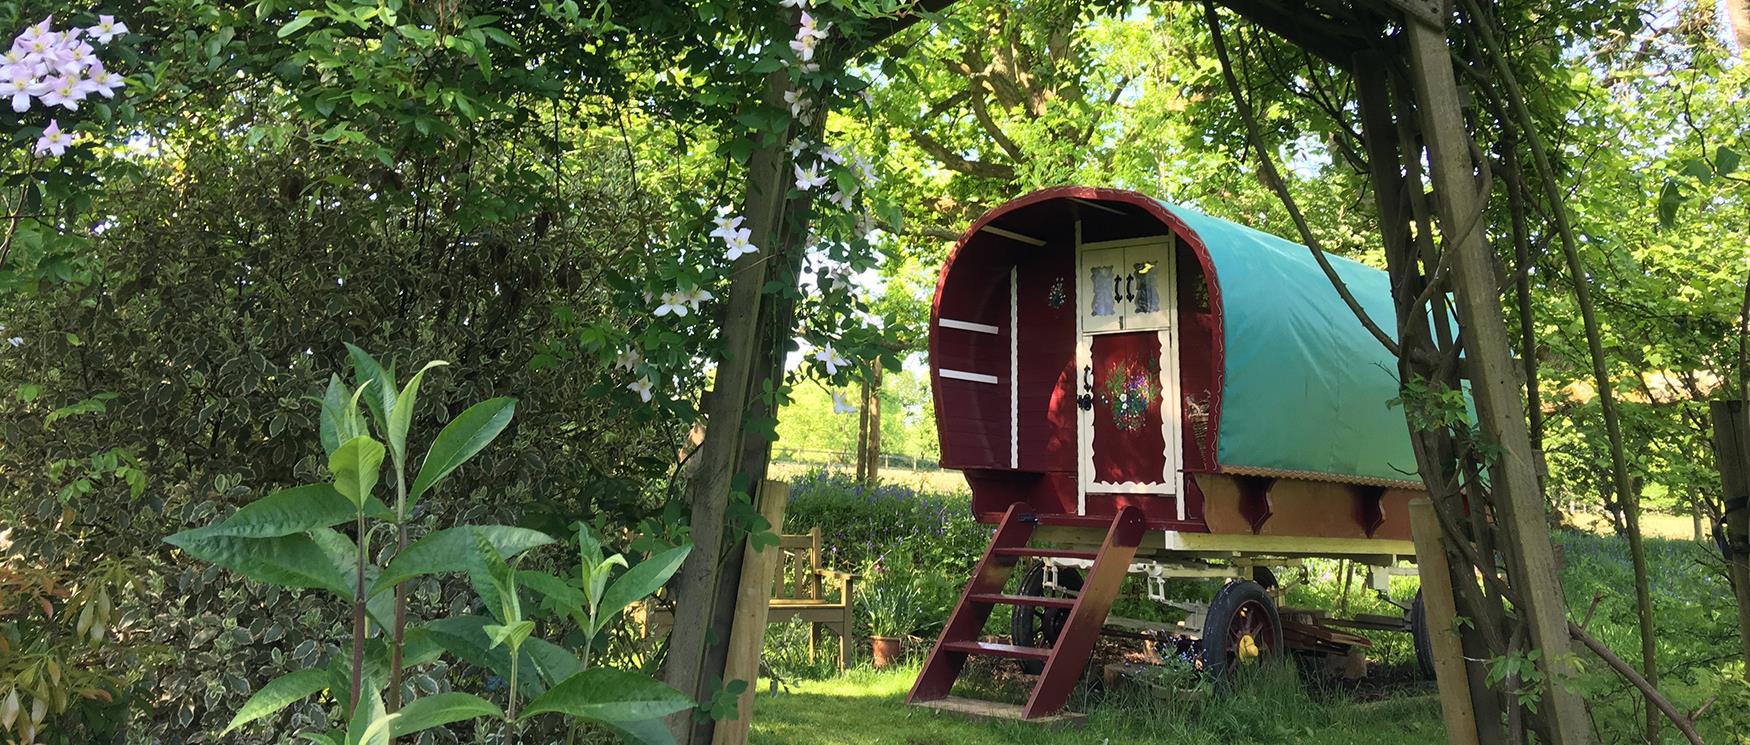 Glamping Self Catering Accommodation in Hampshire